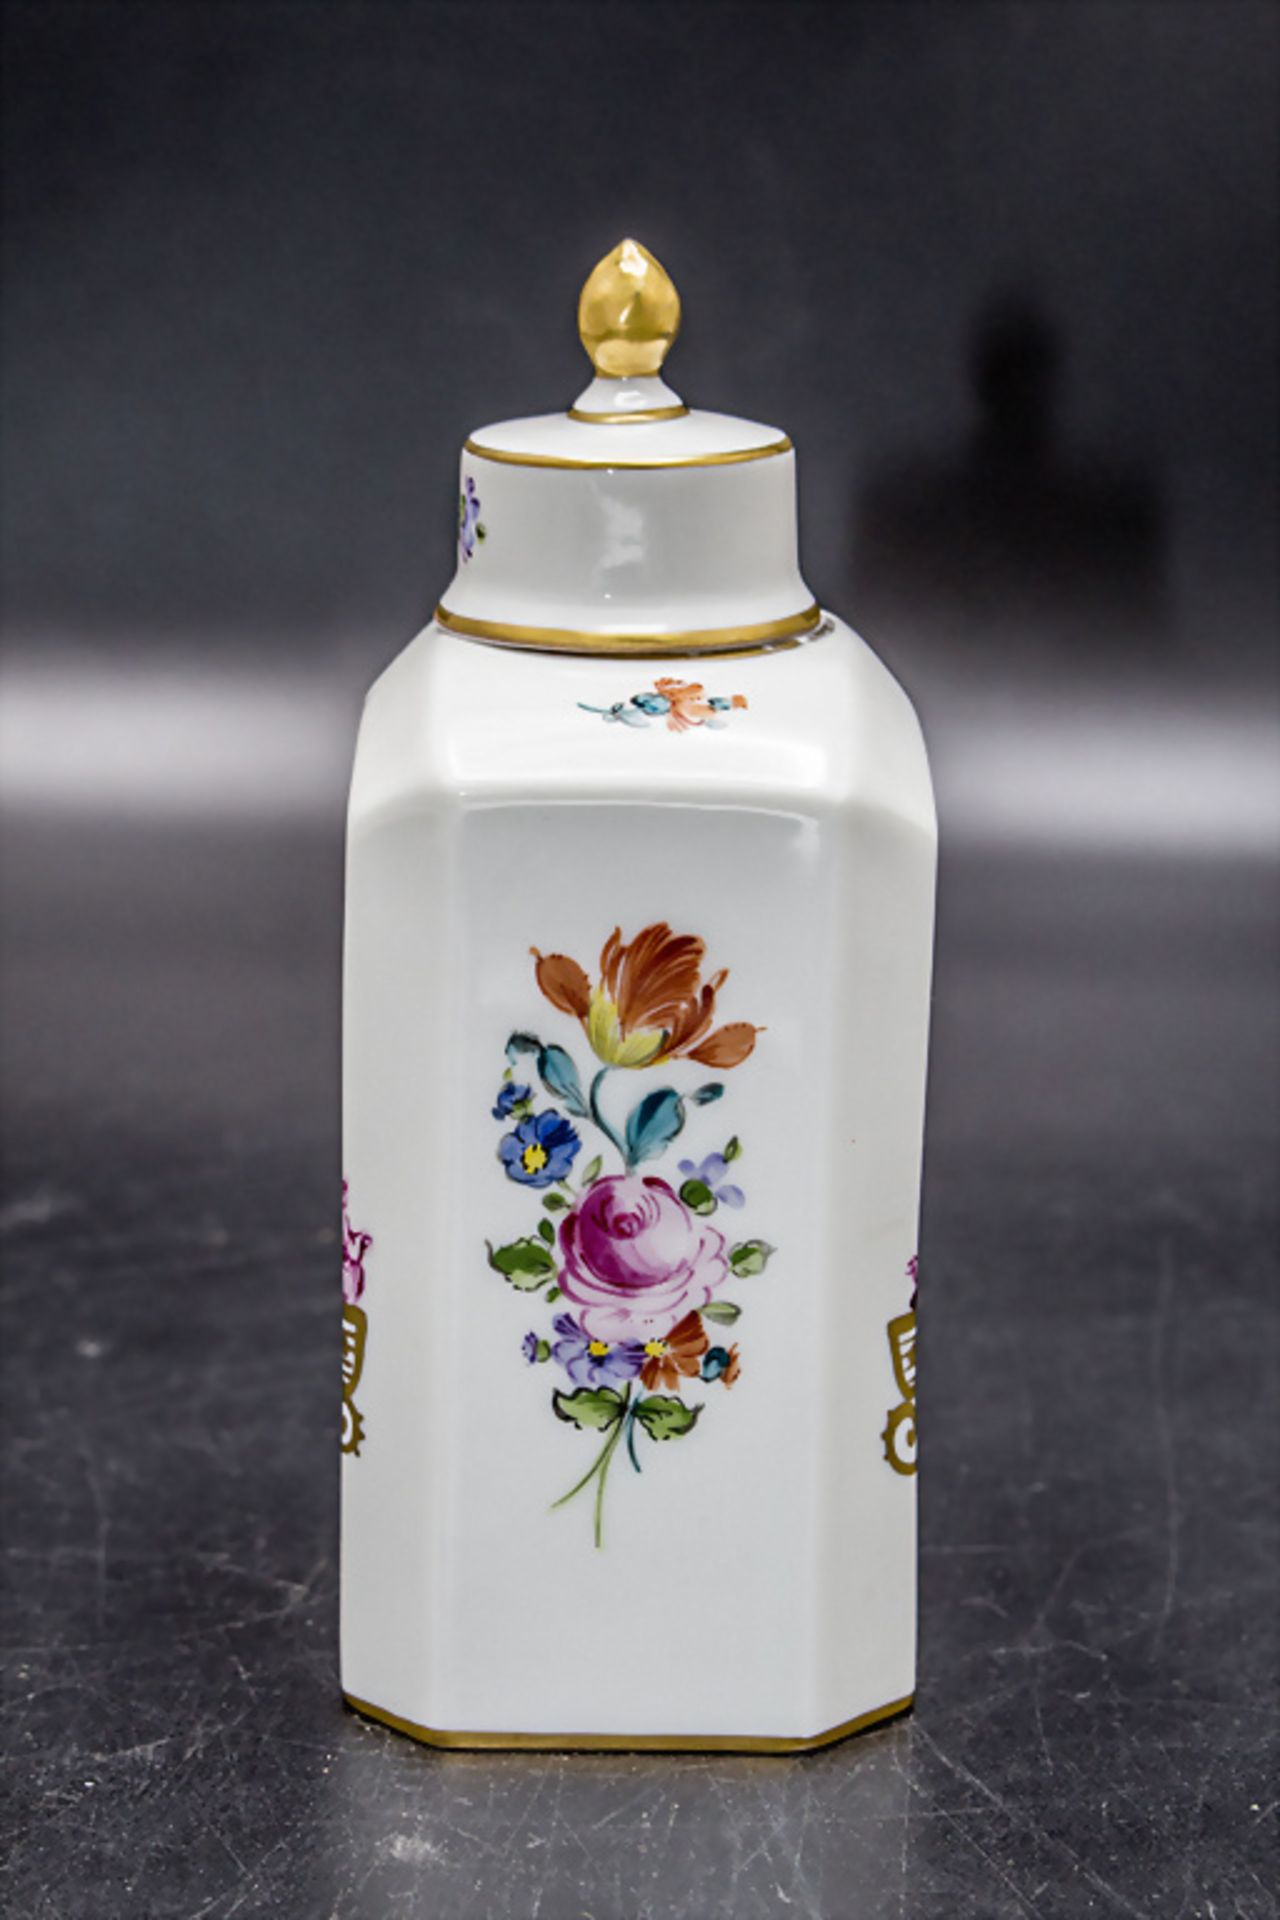 Teedose mit Chinoiserien / A tea caddy with Chinoiserie scenes, Carl Thieme, Potschappel, nach 1900 - Image 2 of 8